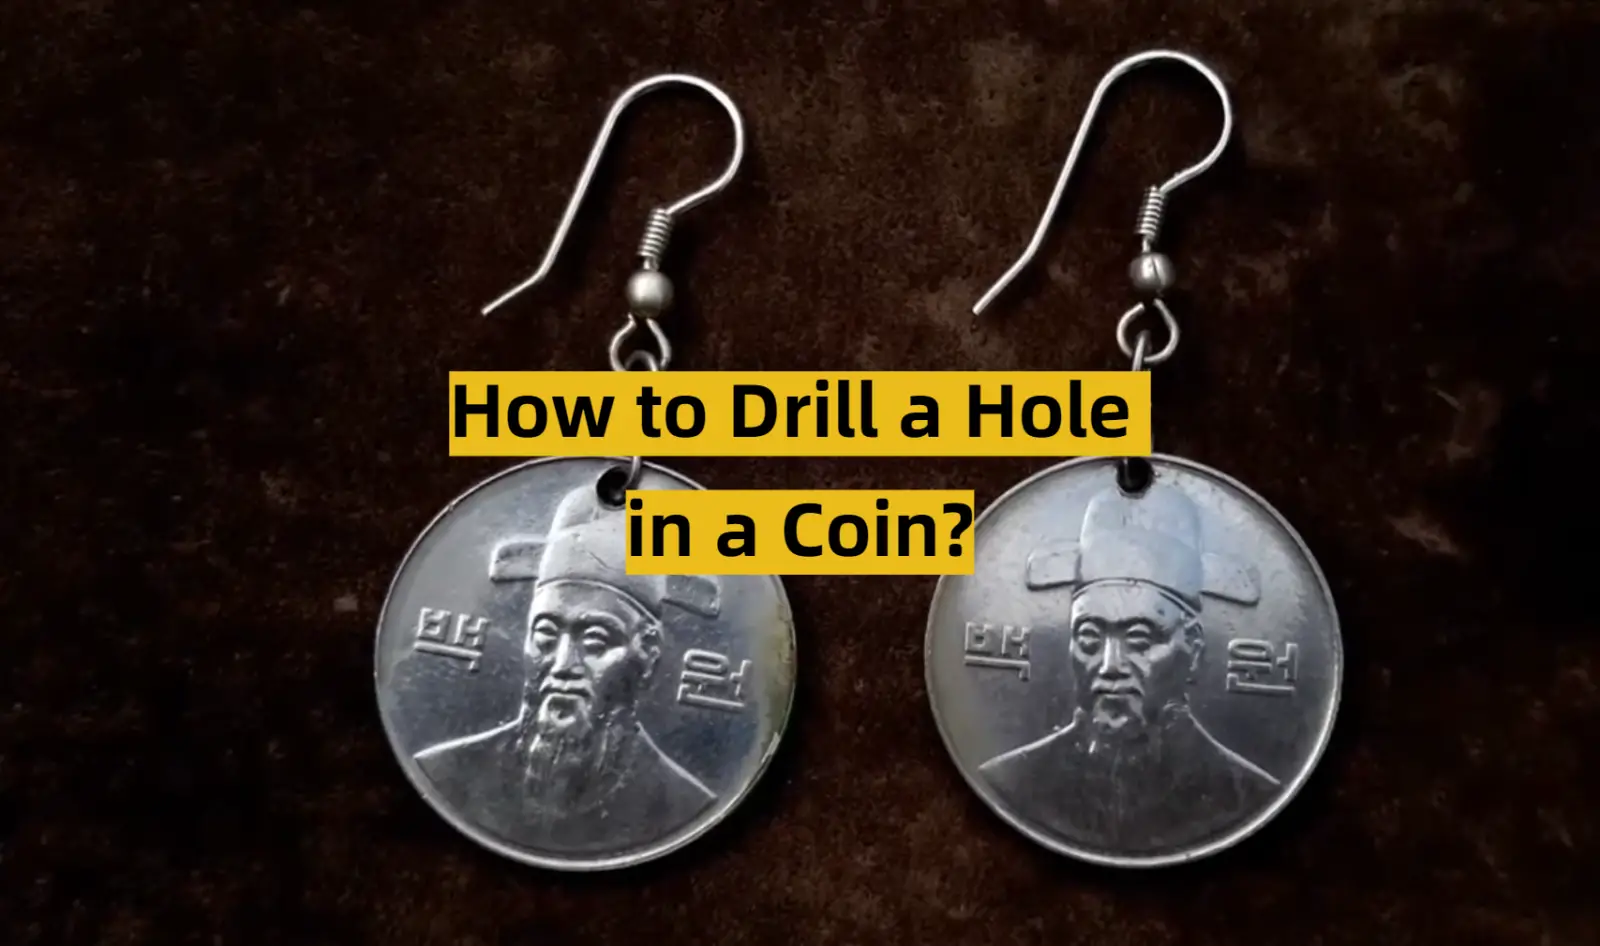 How to Drill a Hole in a Coin?